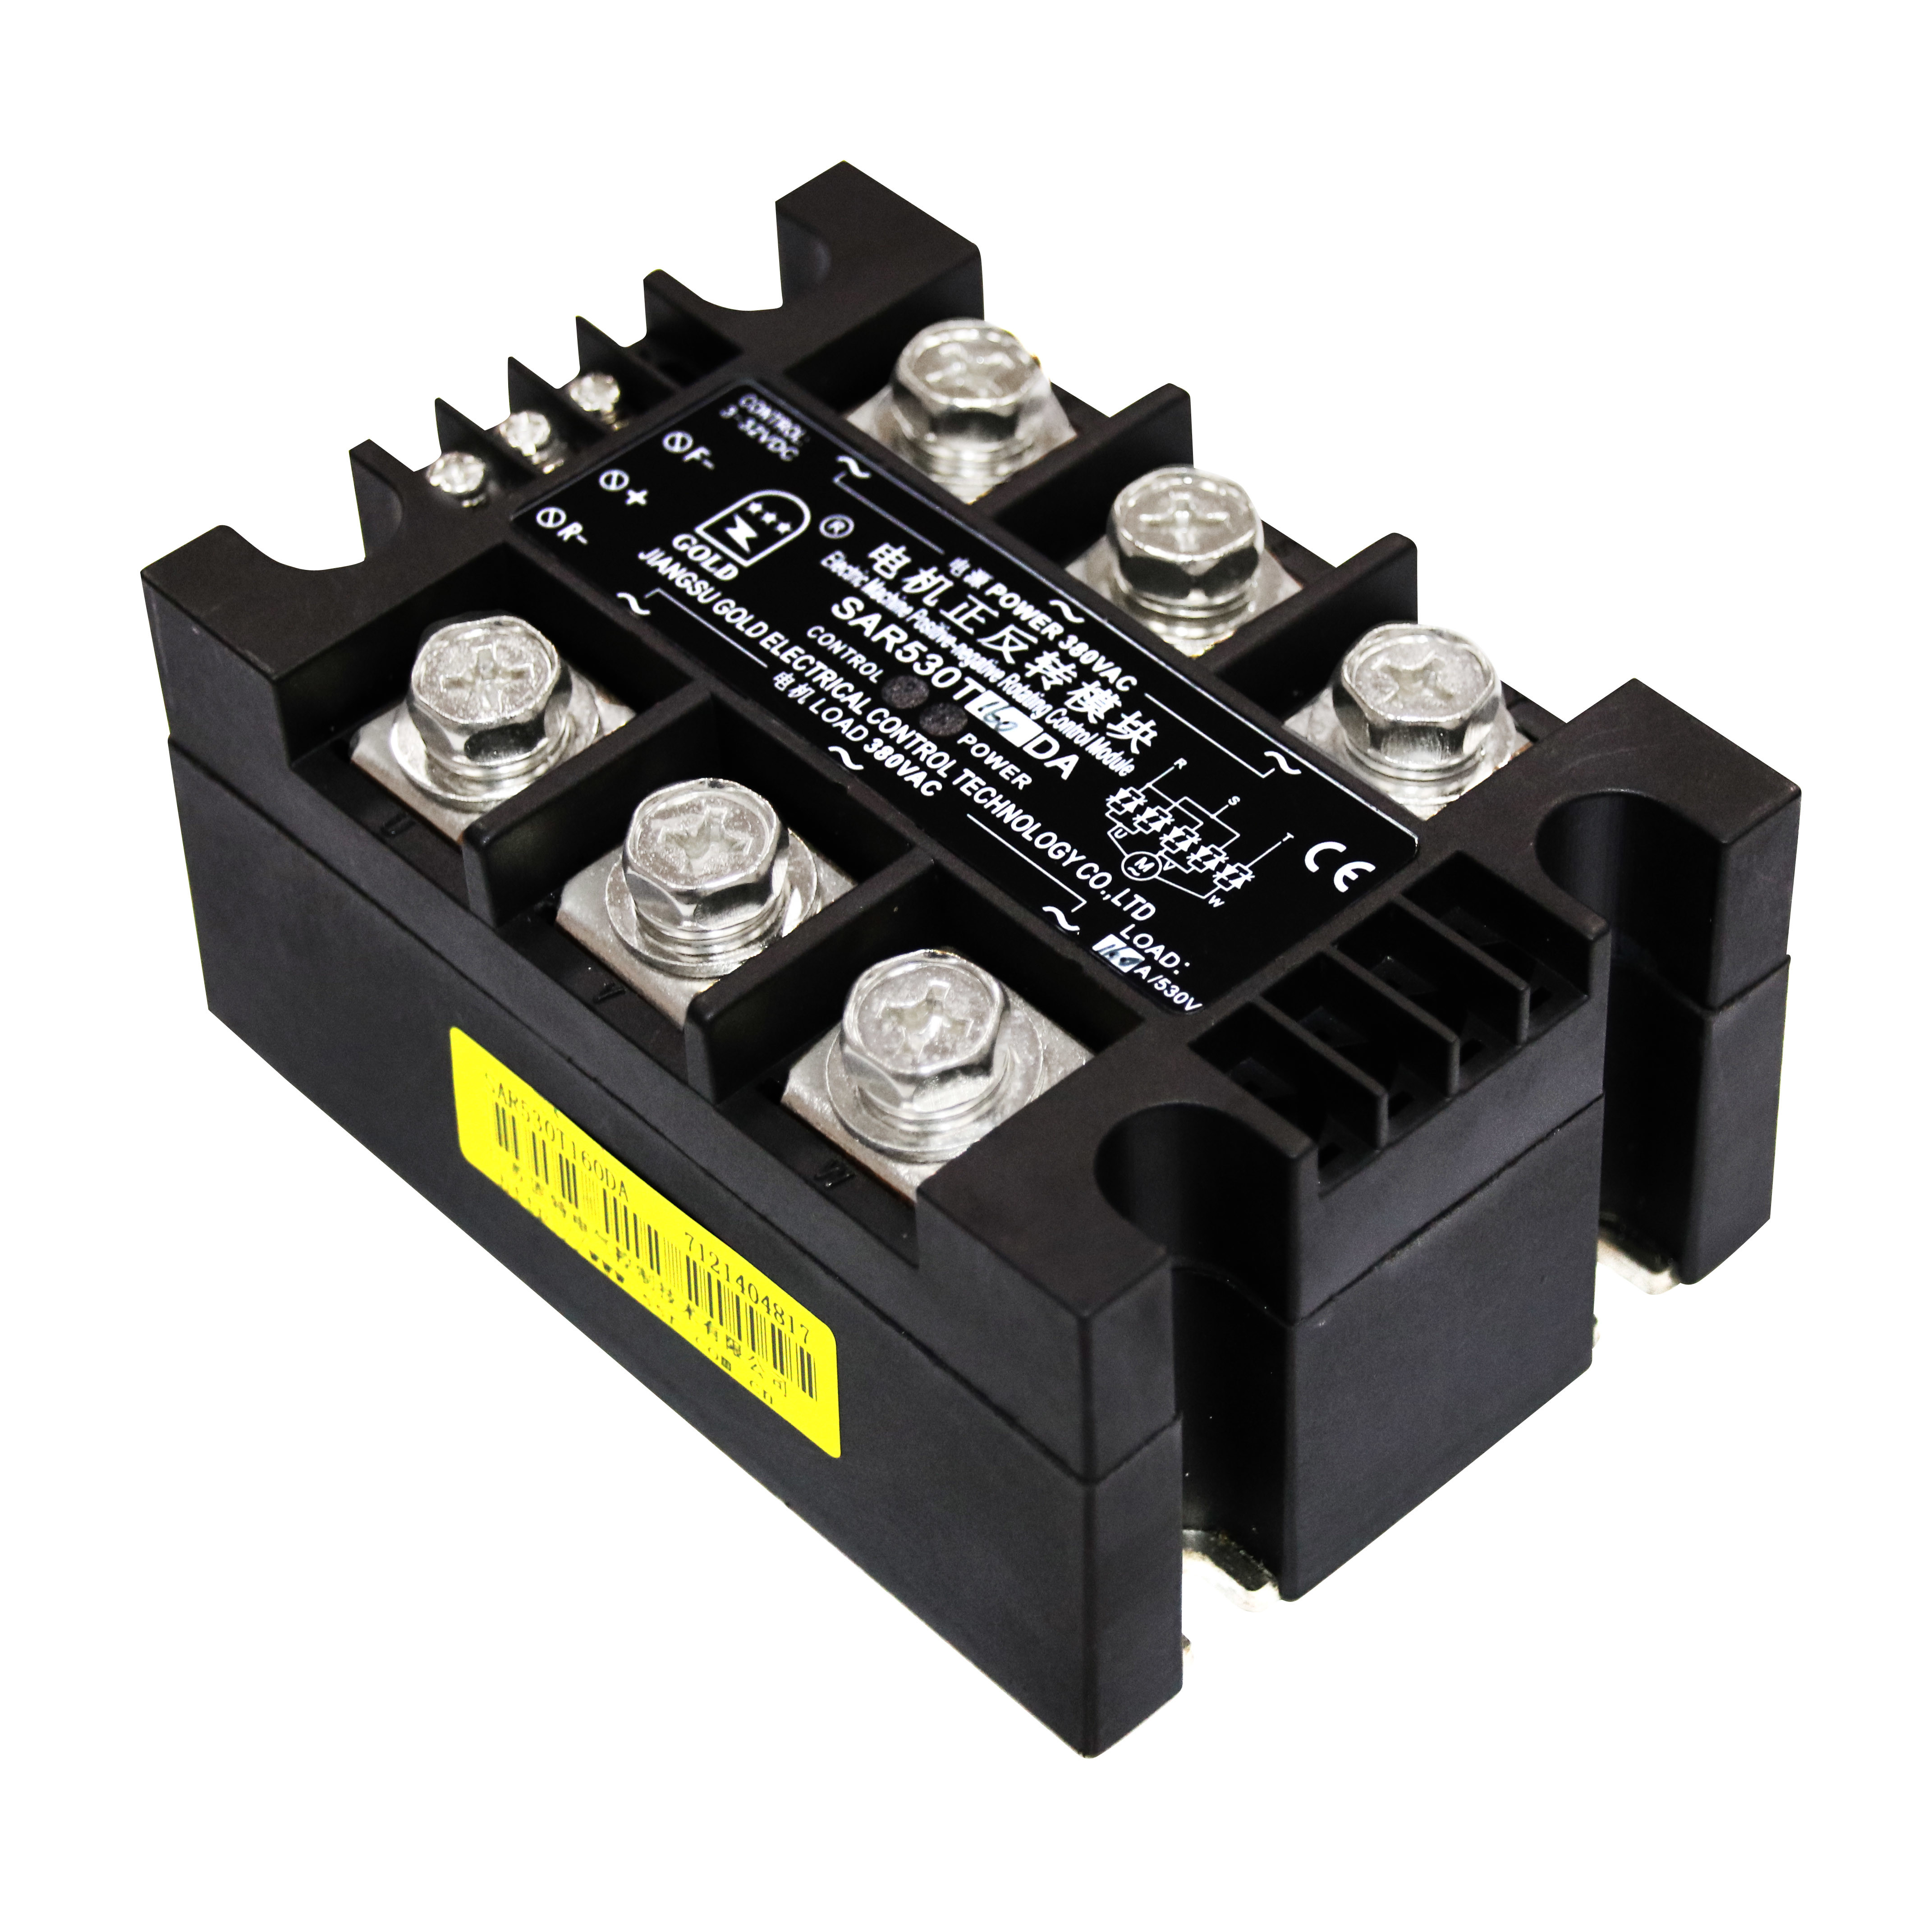 China 145mm 240v Induction AC Motor Controller wholesale